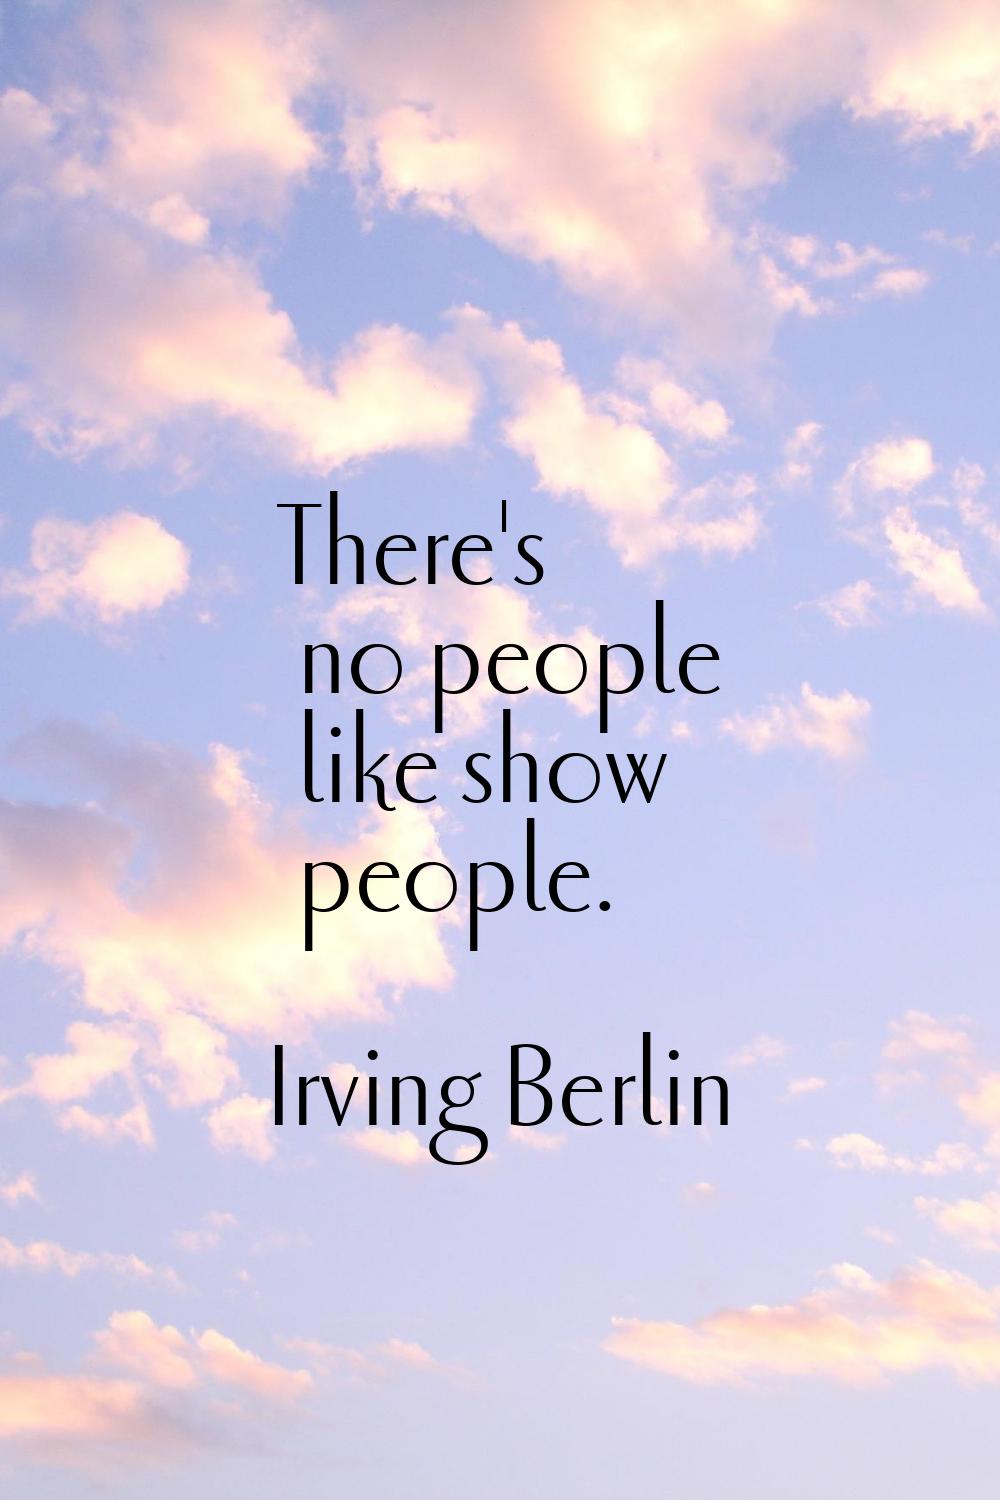 There's no people like show people.